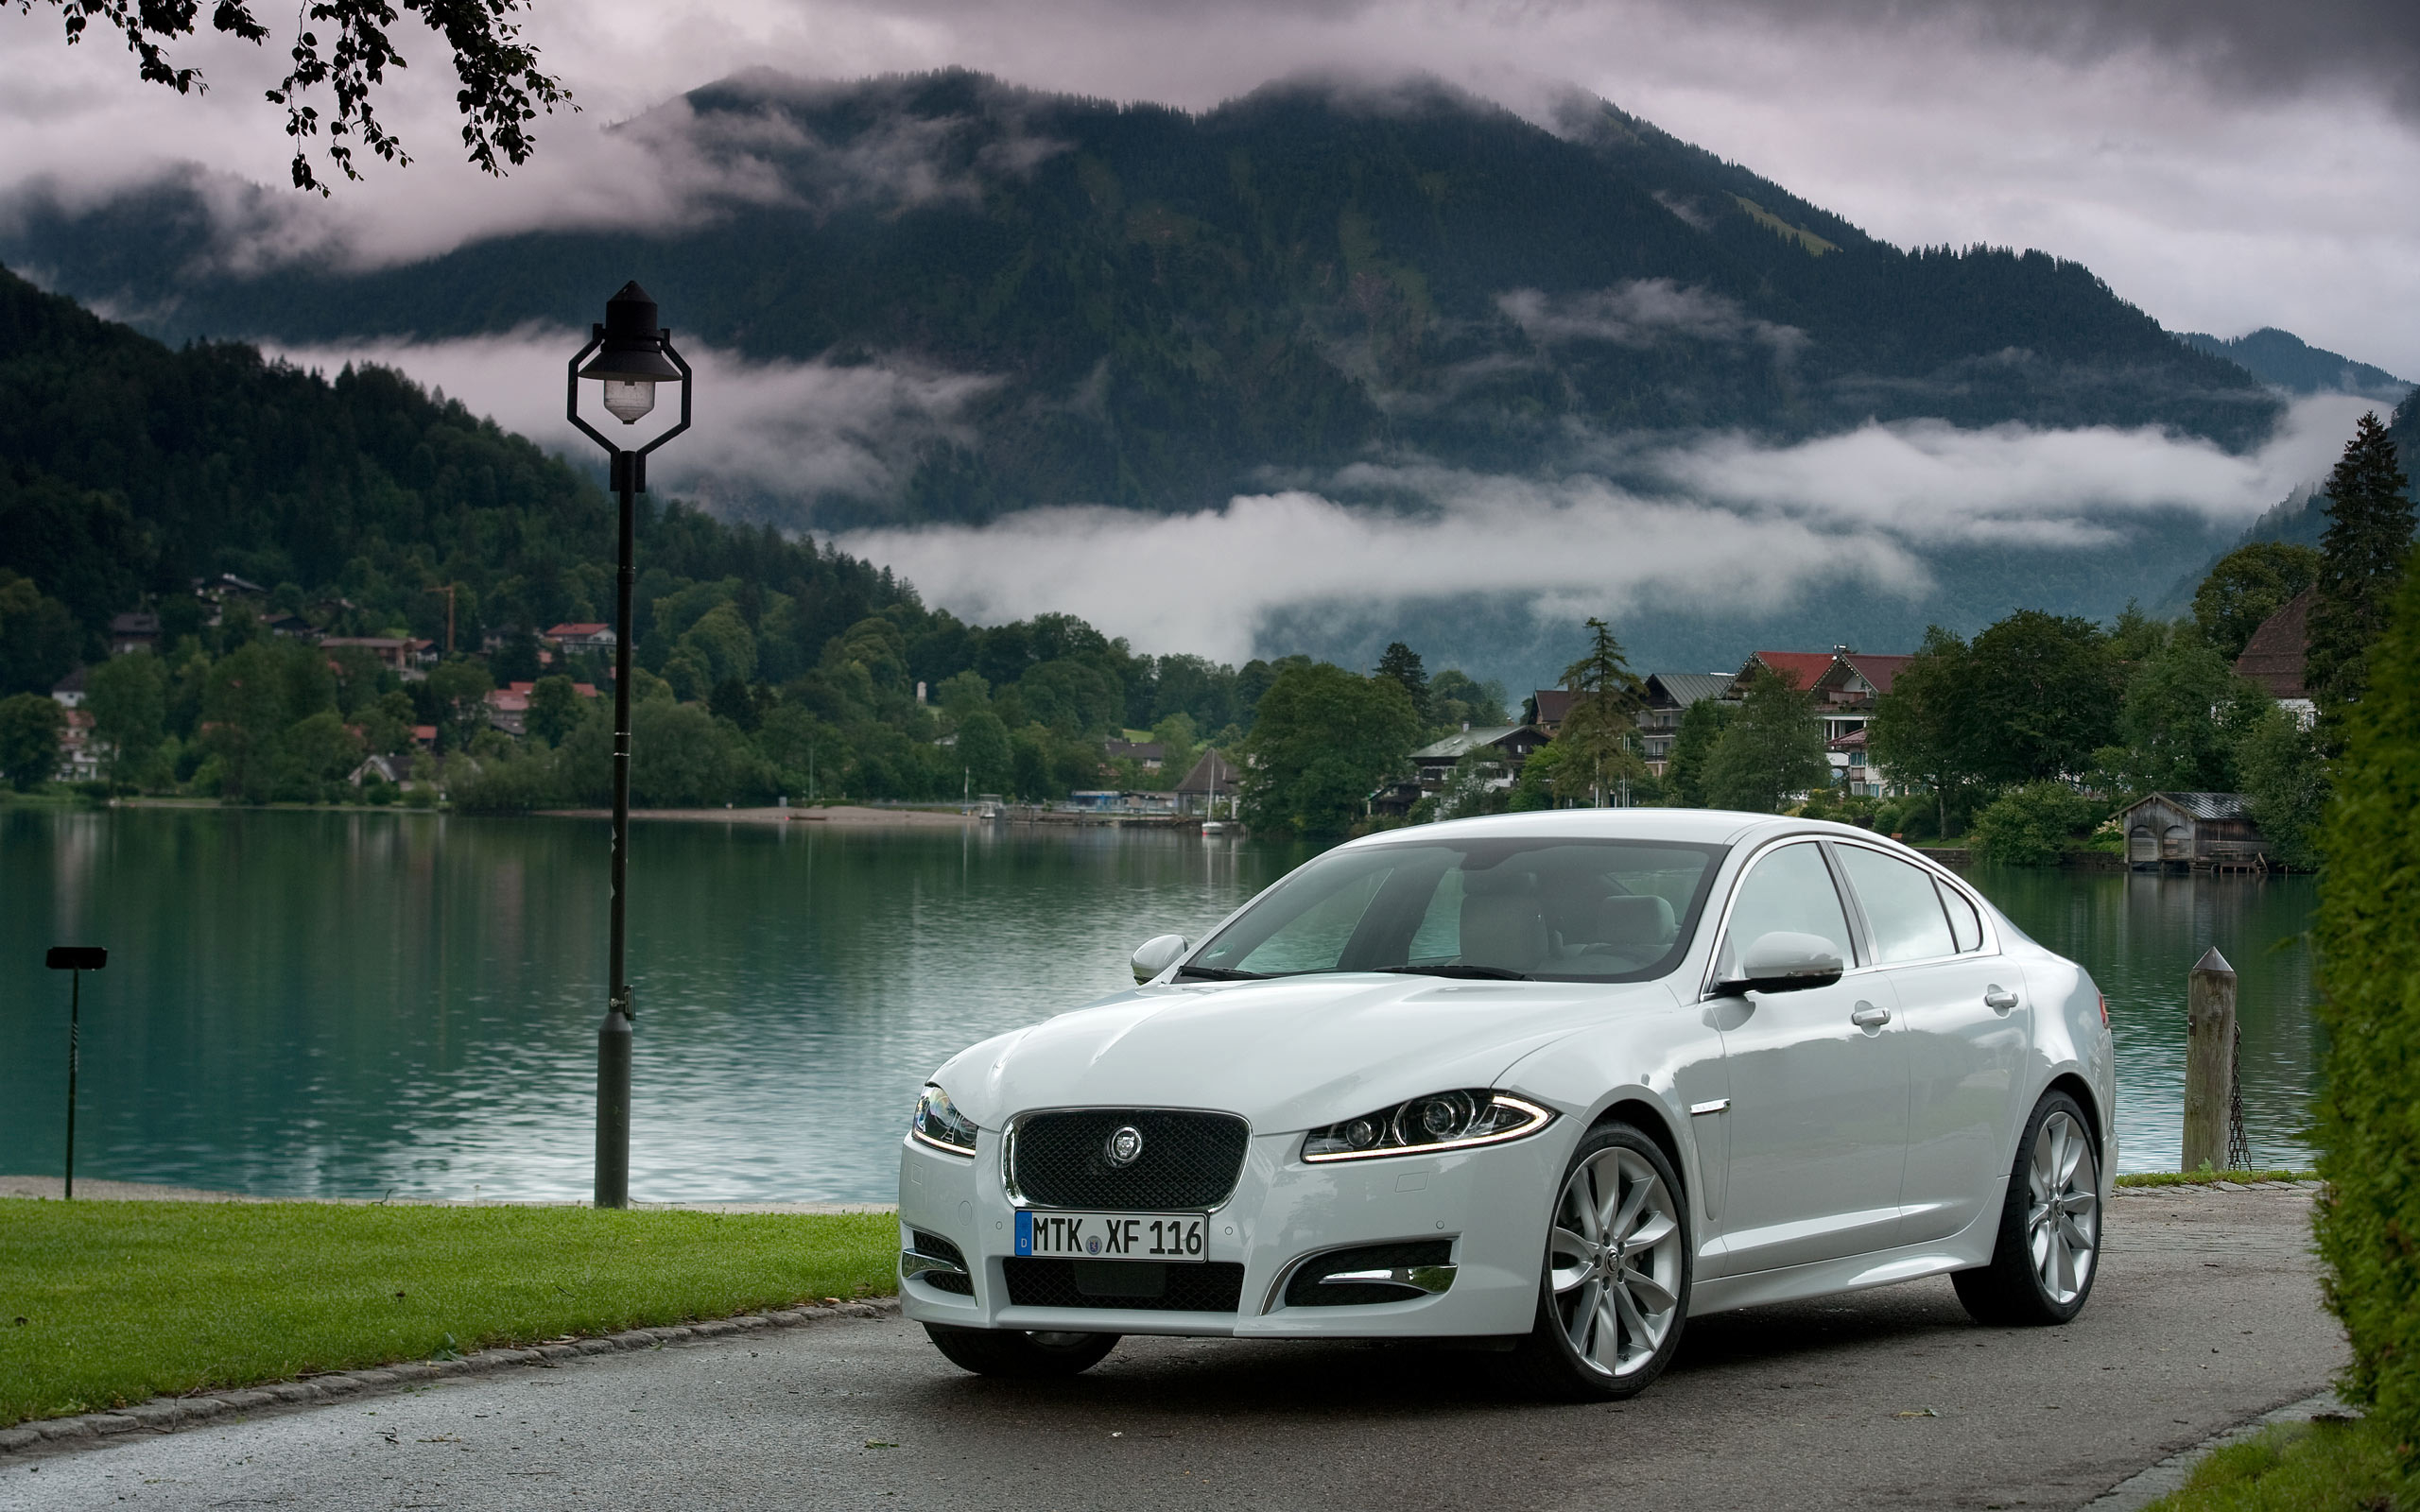 Jaguar XF wallpapers and images - wallpapers, pictures, photos